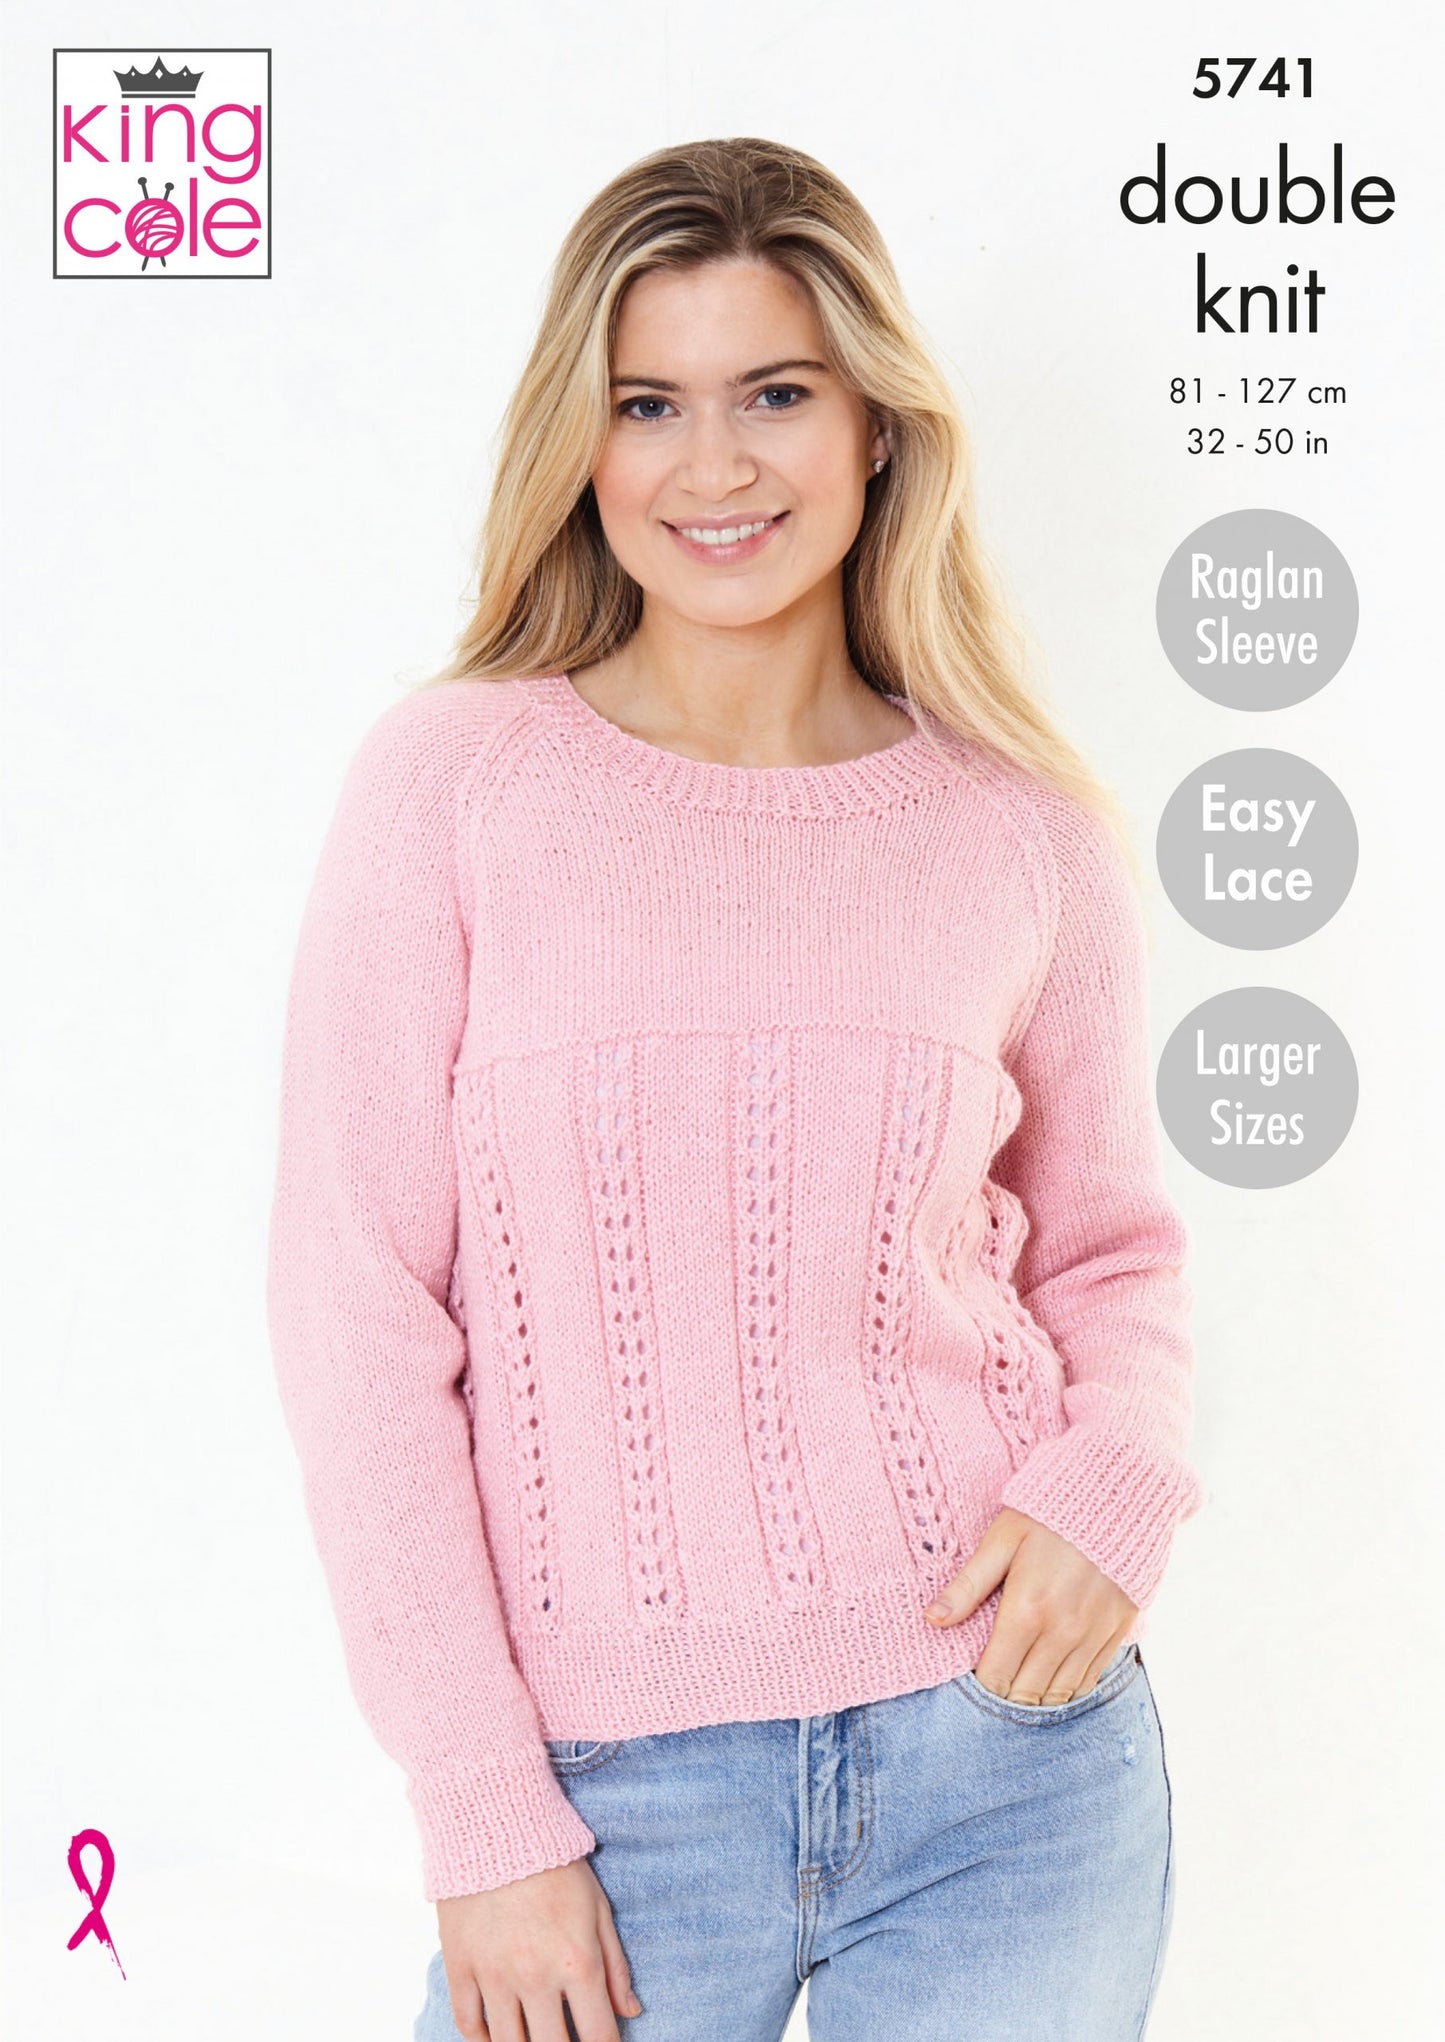 Knitting Pattern 5741 - Cardigan And Sweater: Knitted in Subtle Drifter DK